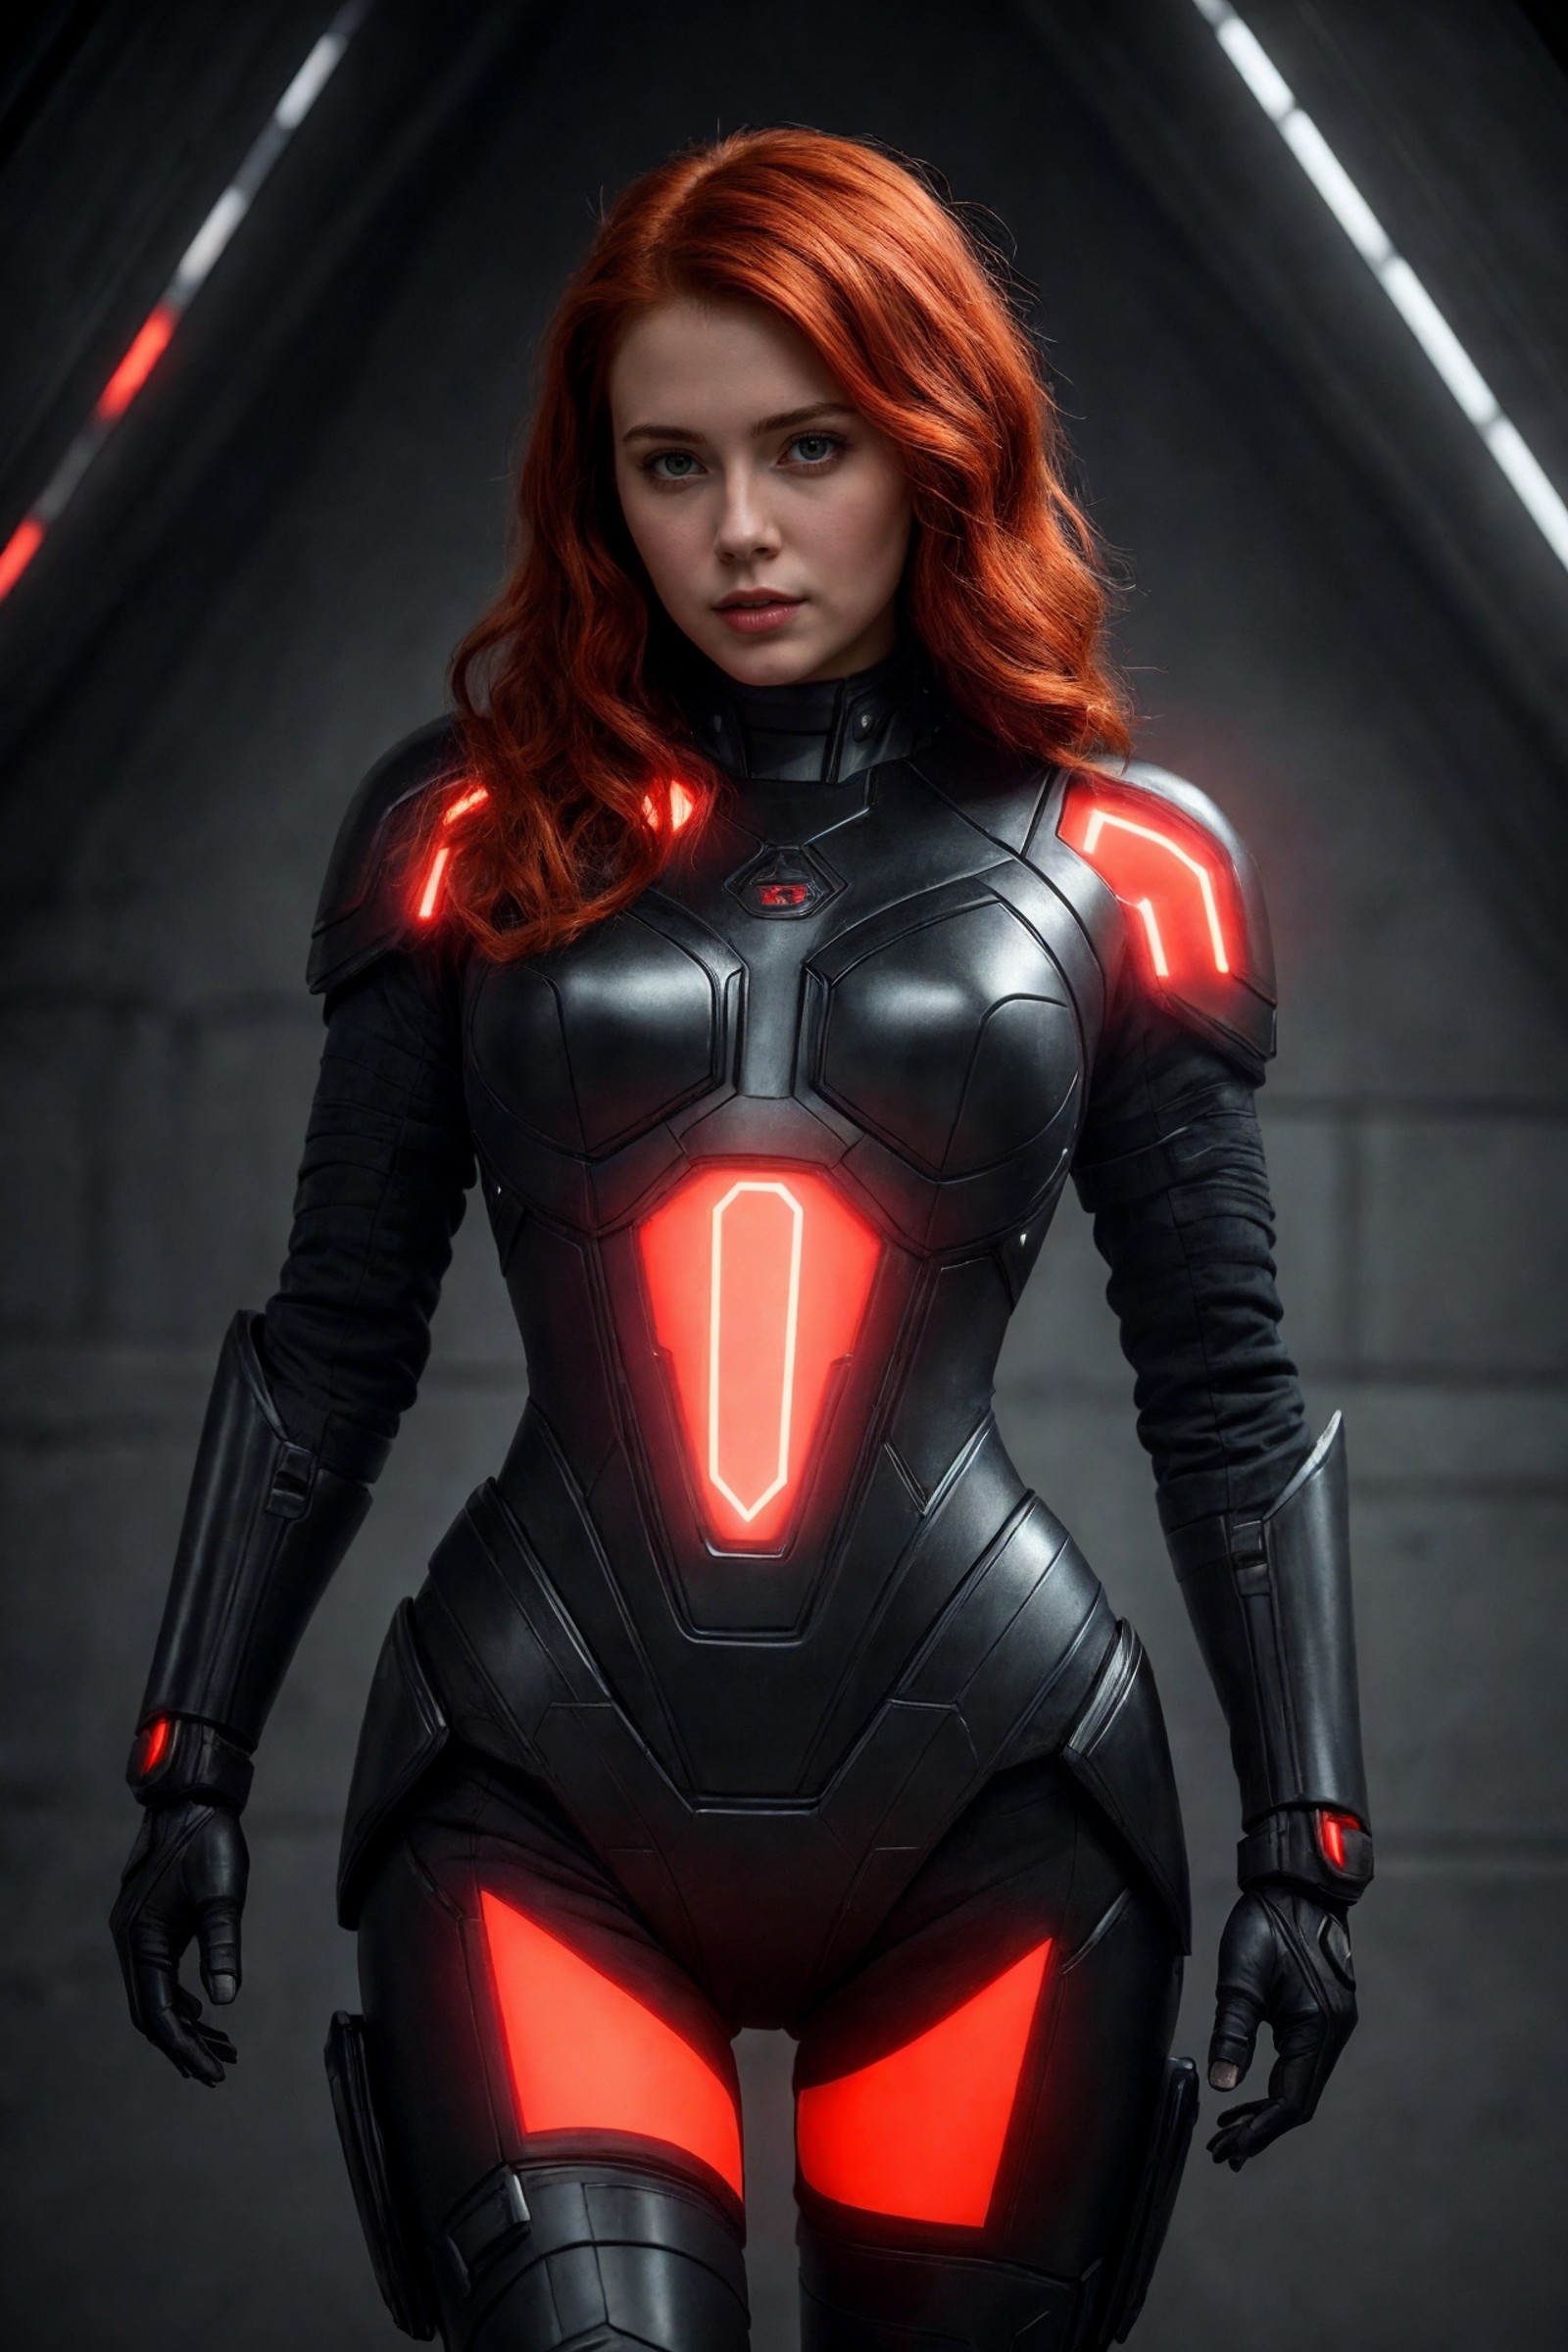 masterpiece, best quality, cute woman, sci-fi armor with black and red colors, glowing elements, redhair